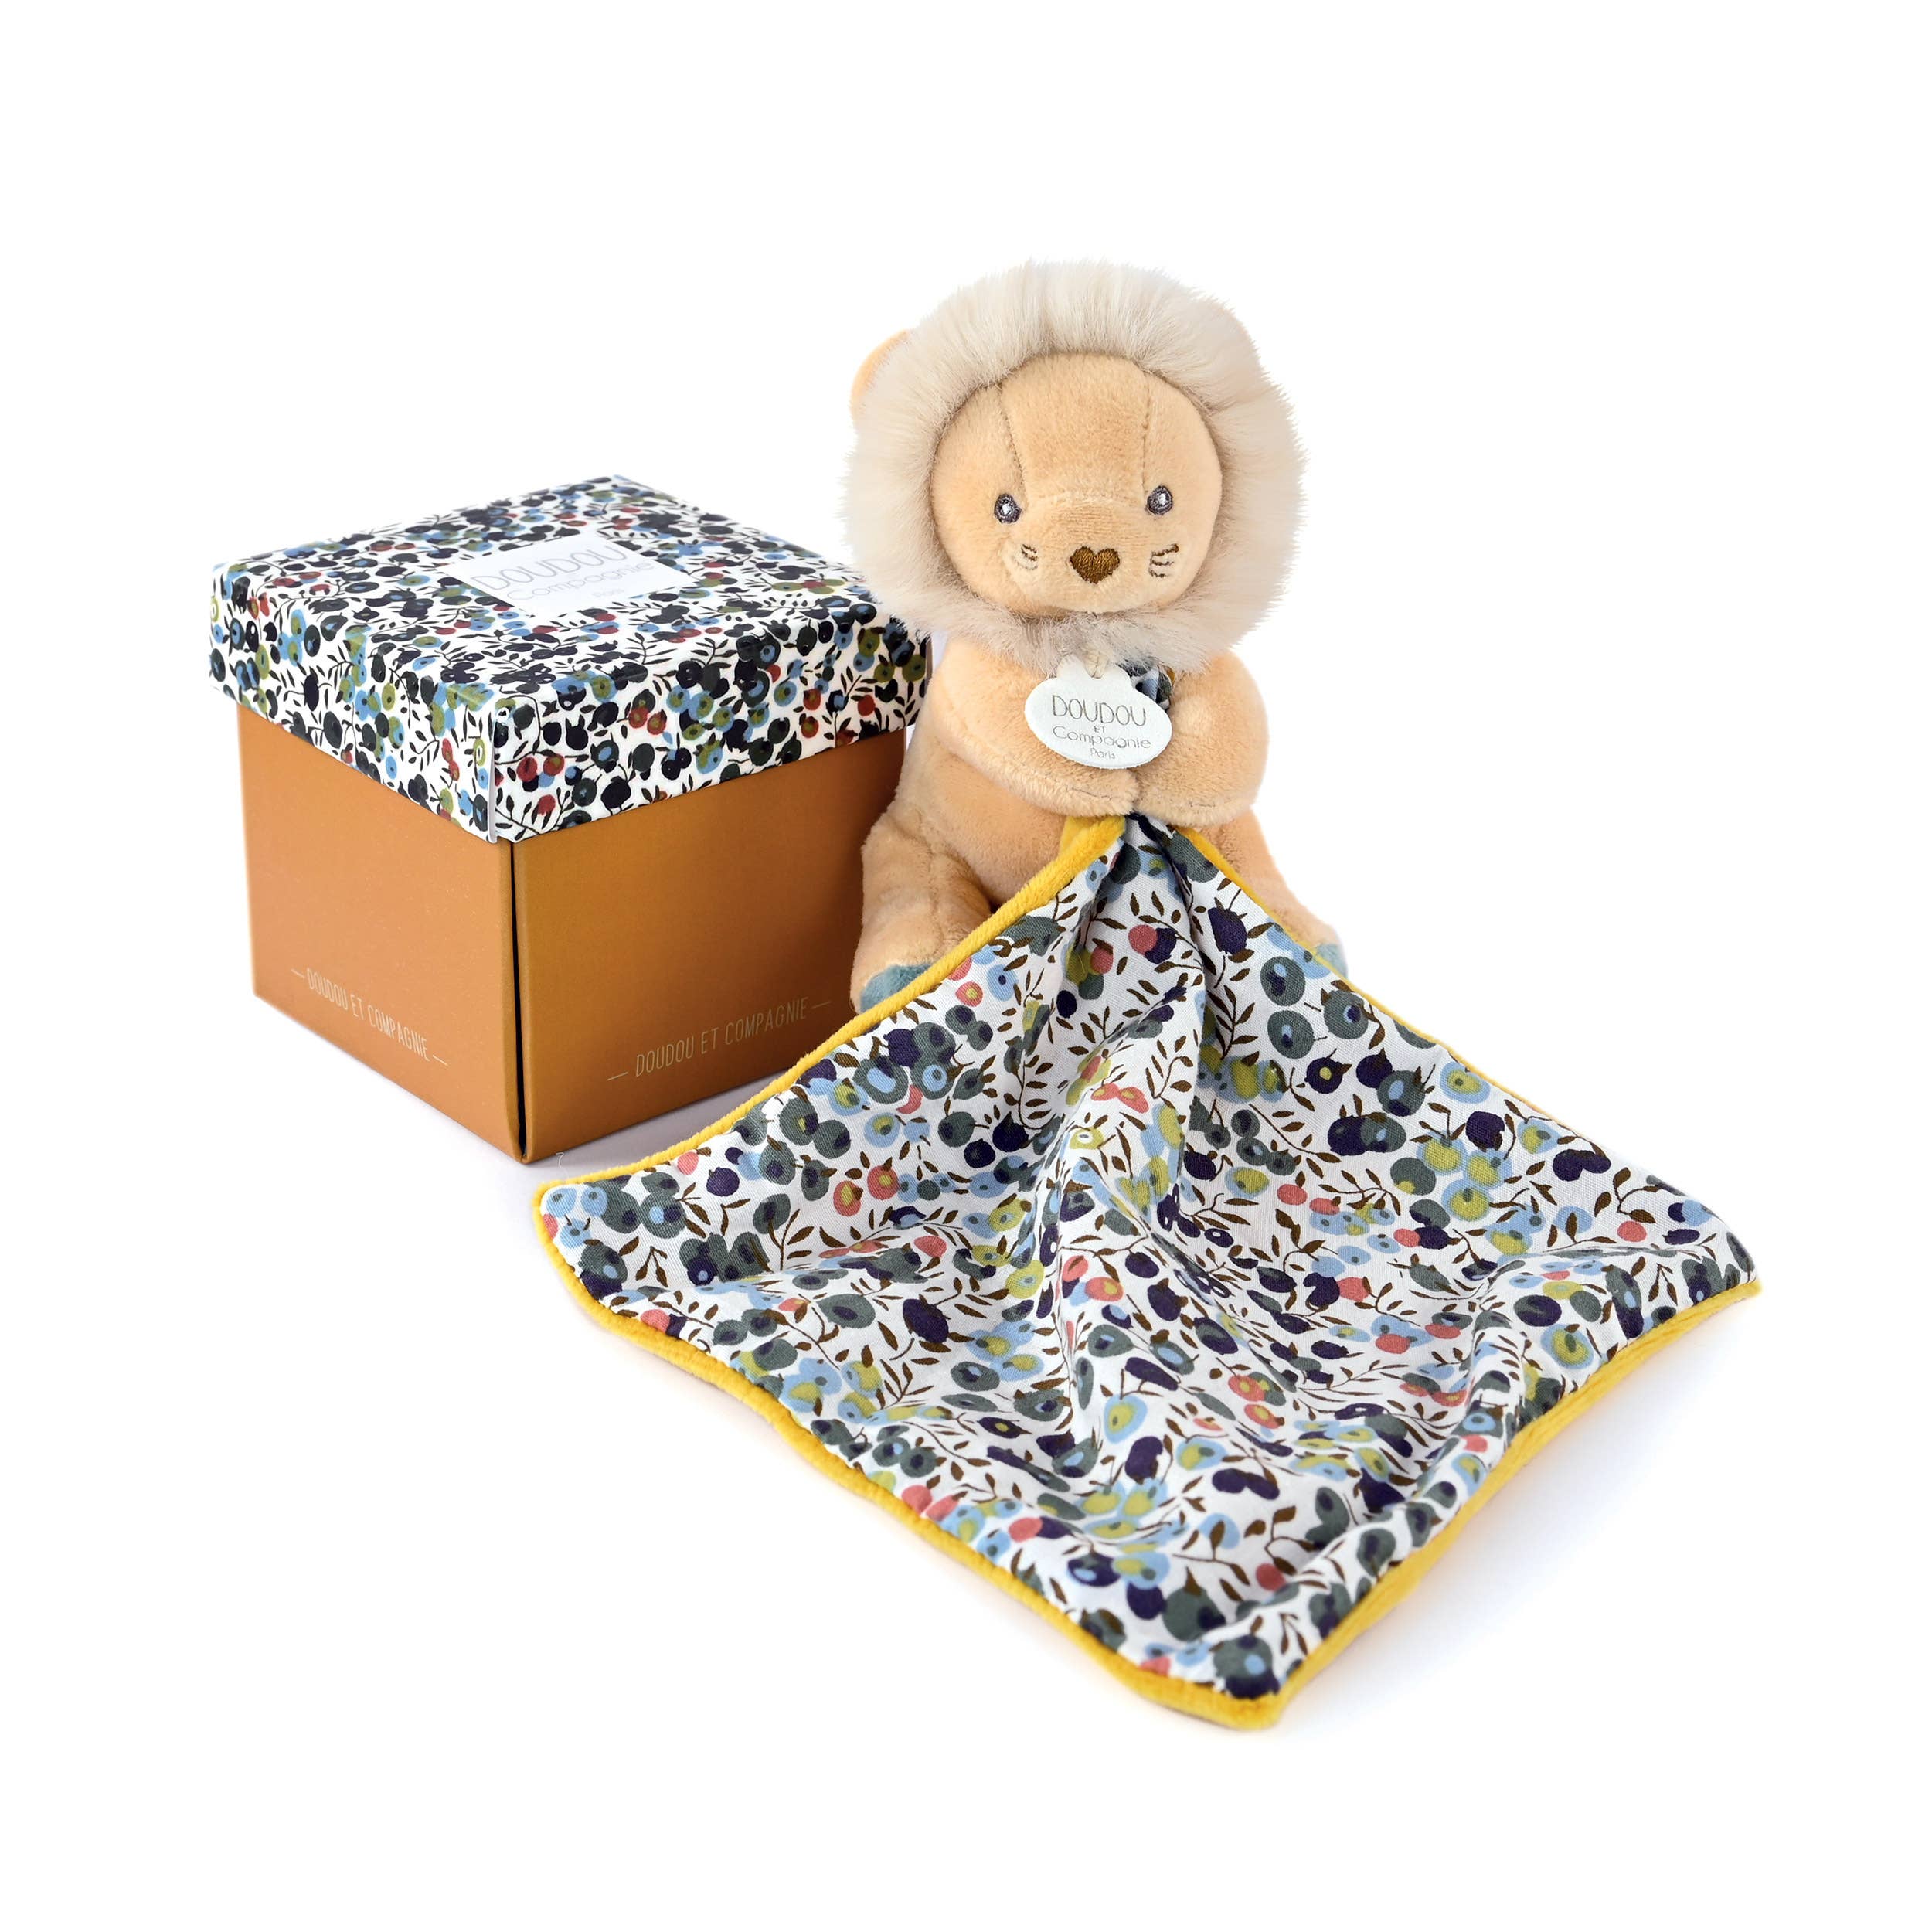 Boh'aime Lion Puppet with Floral Blanket and Gift Box